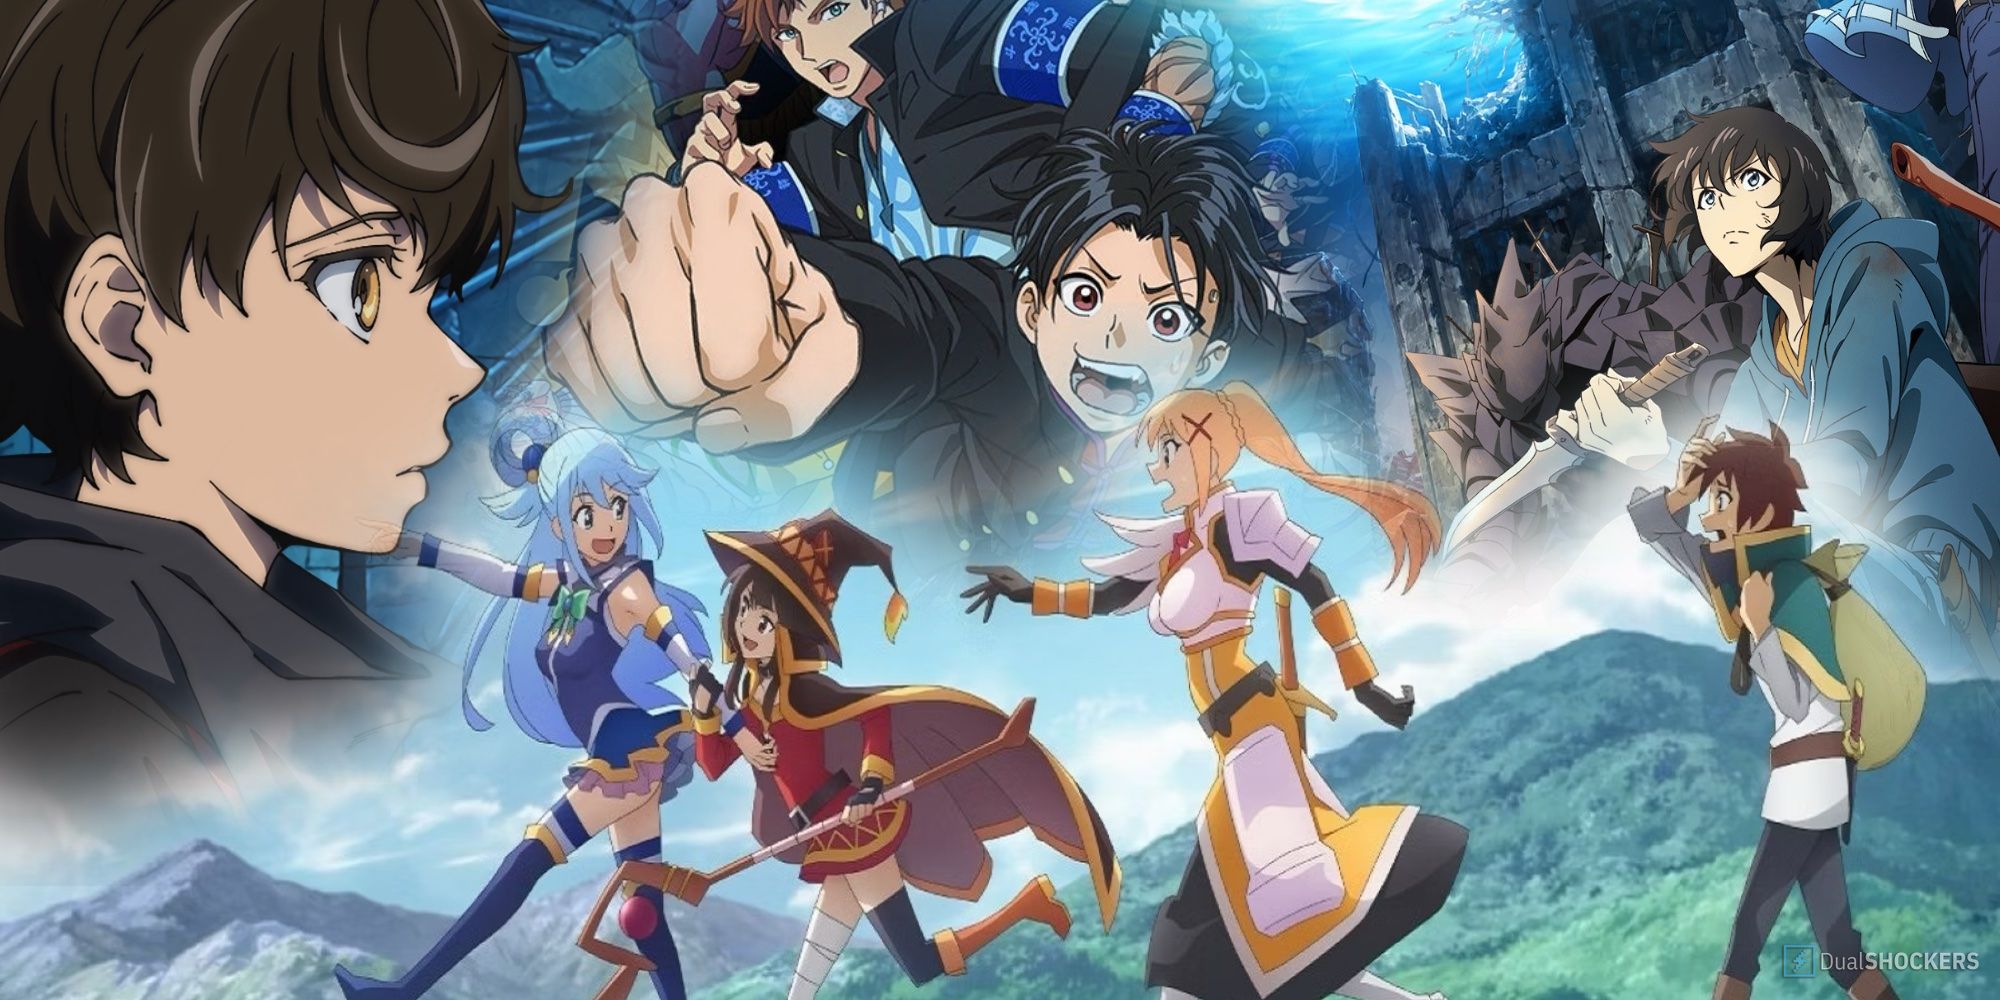 Is BNA A Brand New Animal Or A Bland New Anime? - Bell of Lost Souls